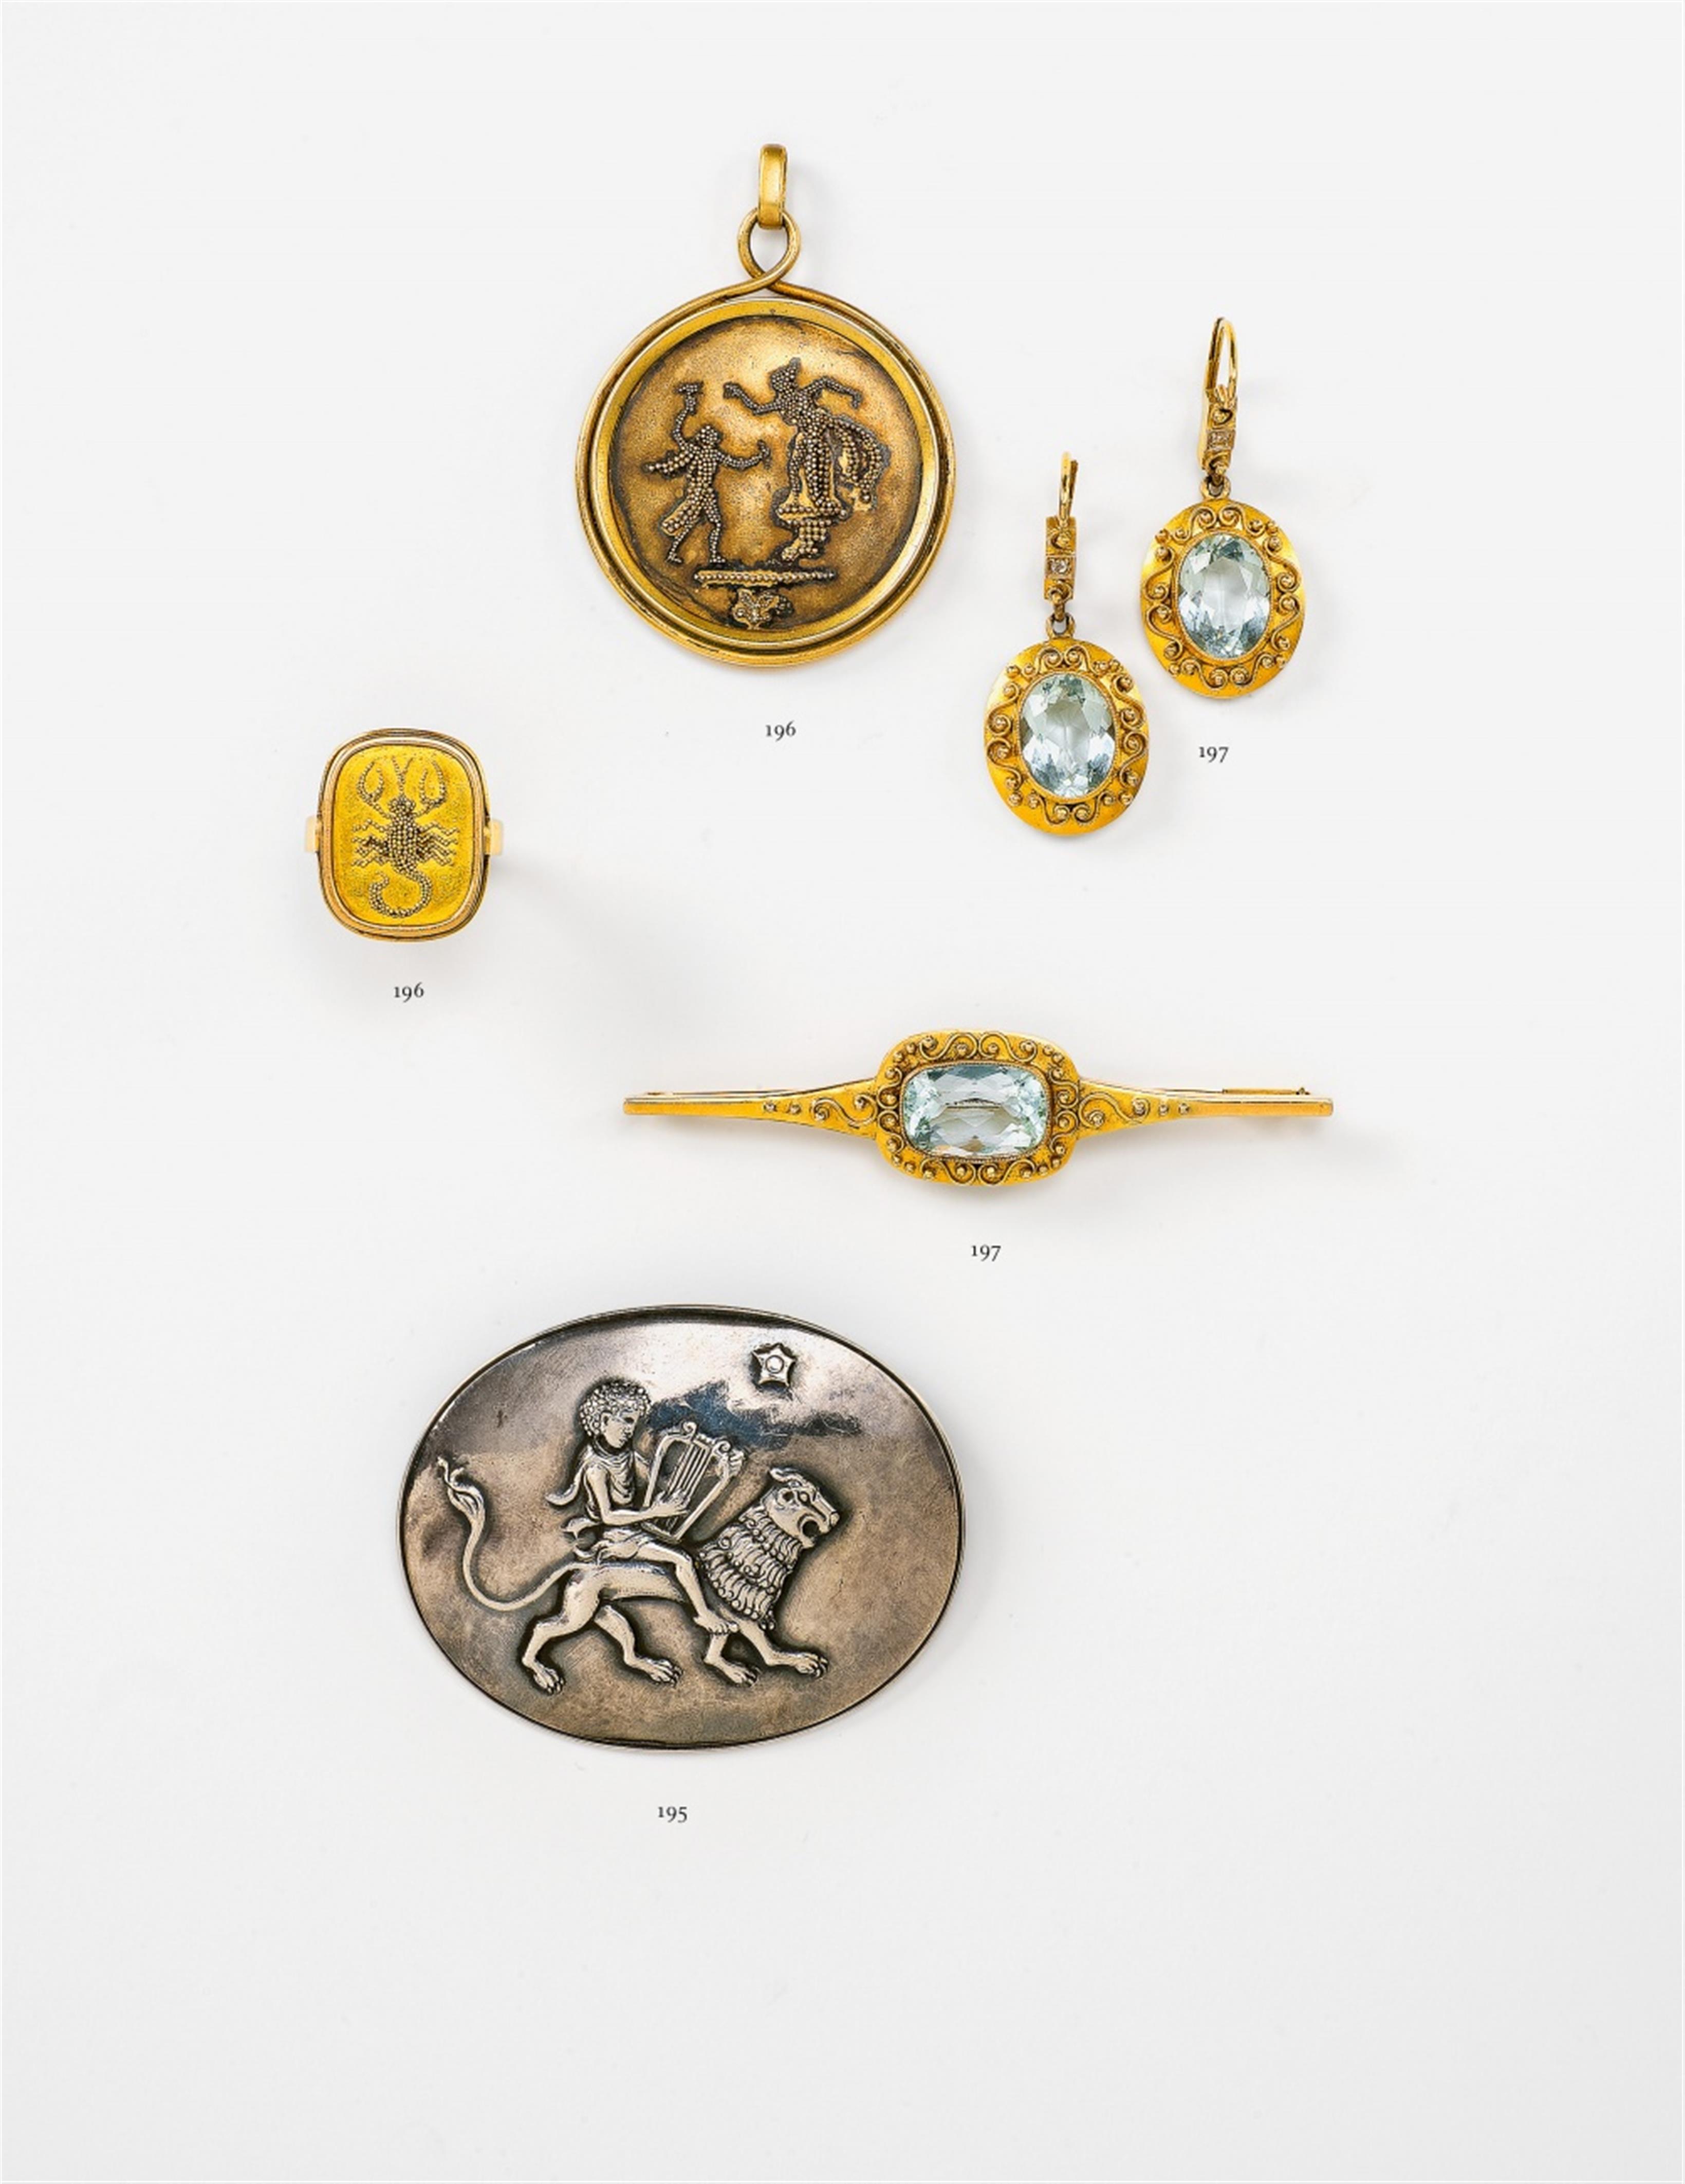 A gold ring and pendant with granulation decor - image-1